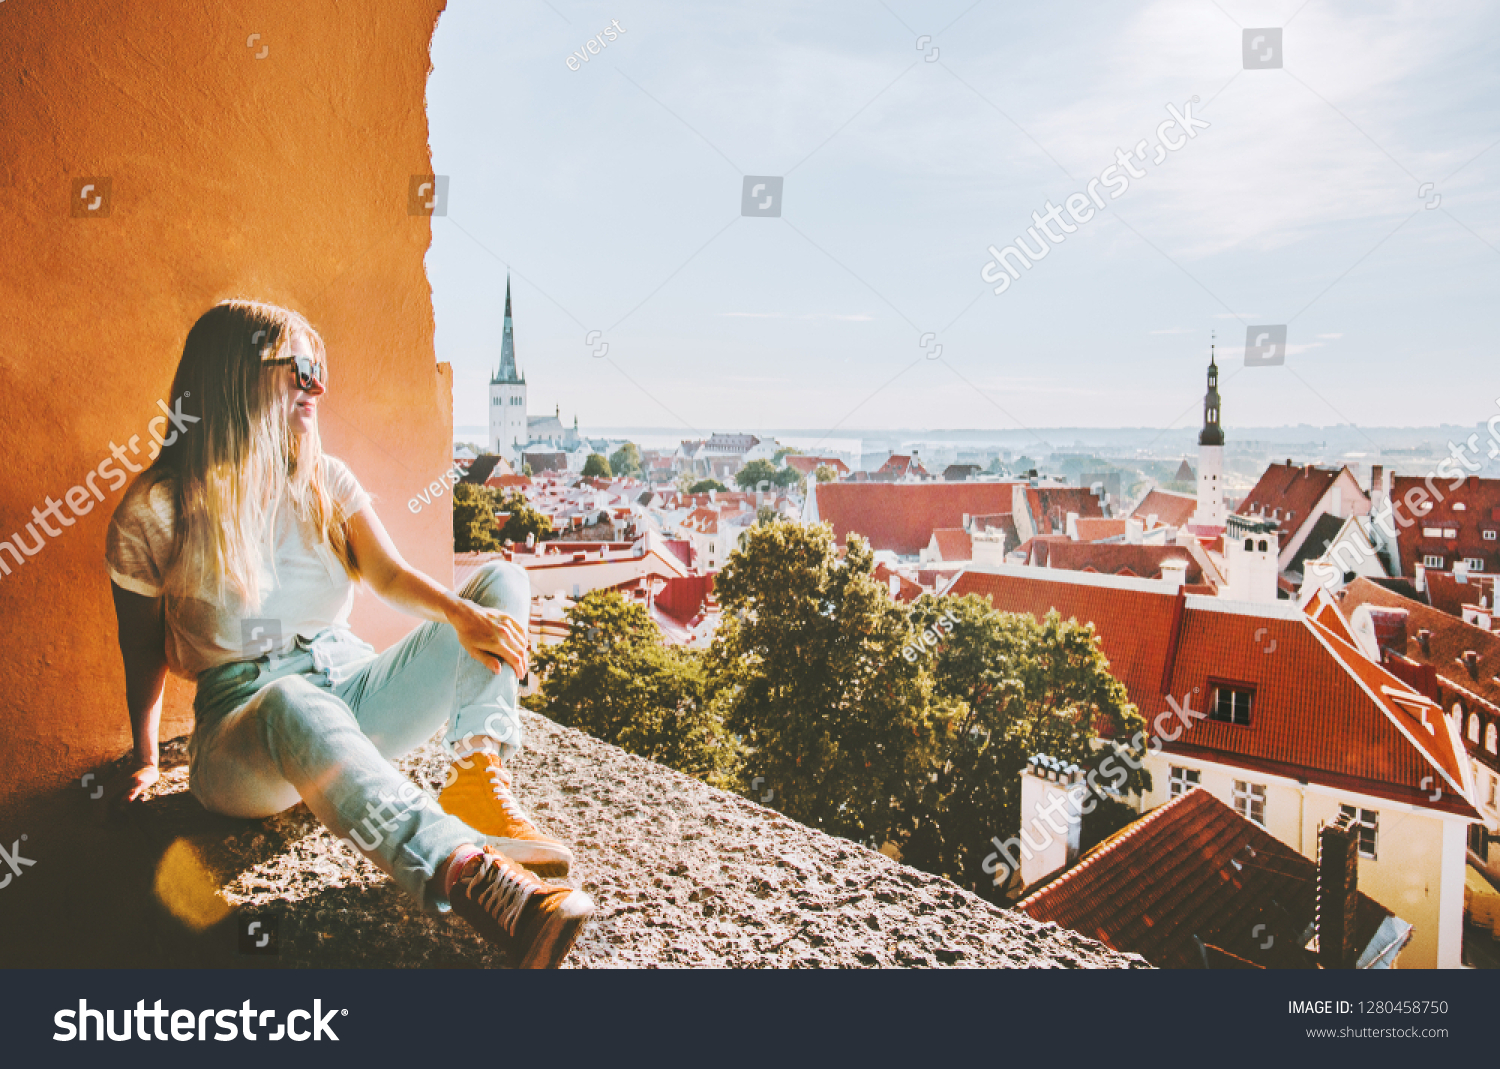 Woman sightseeing Tallinn city landmarks  vacations in Estonia travel lifestyle girl tourist relaxing at viewpoint Old Town aerial view architecture  #1280458750